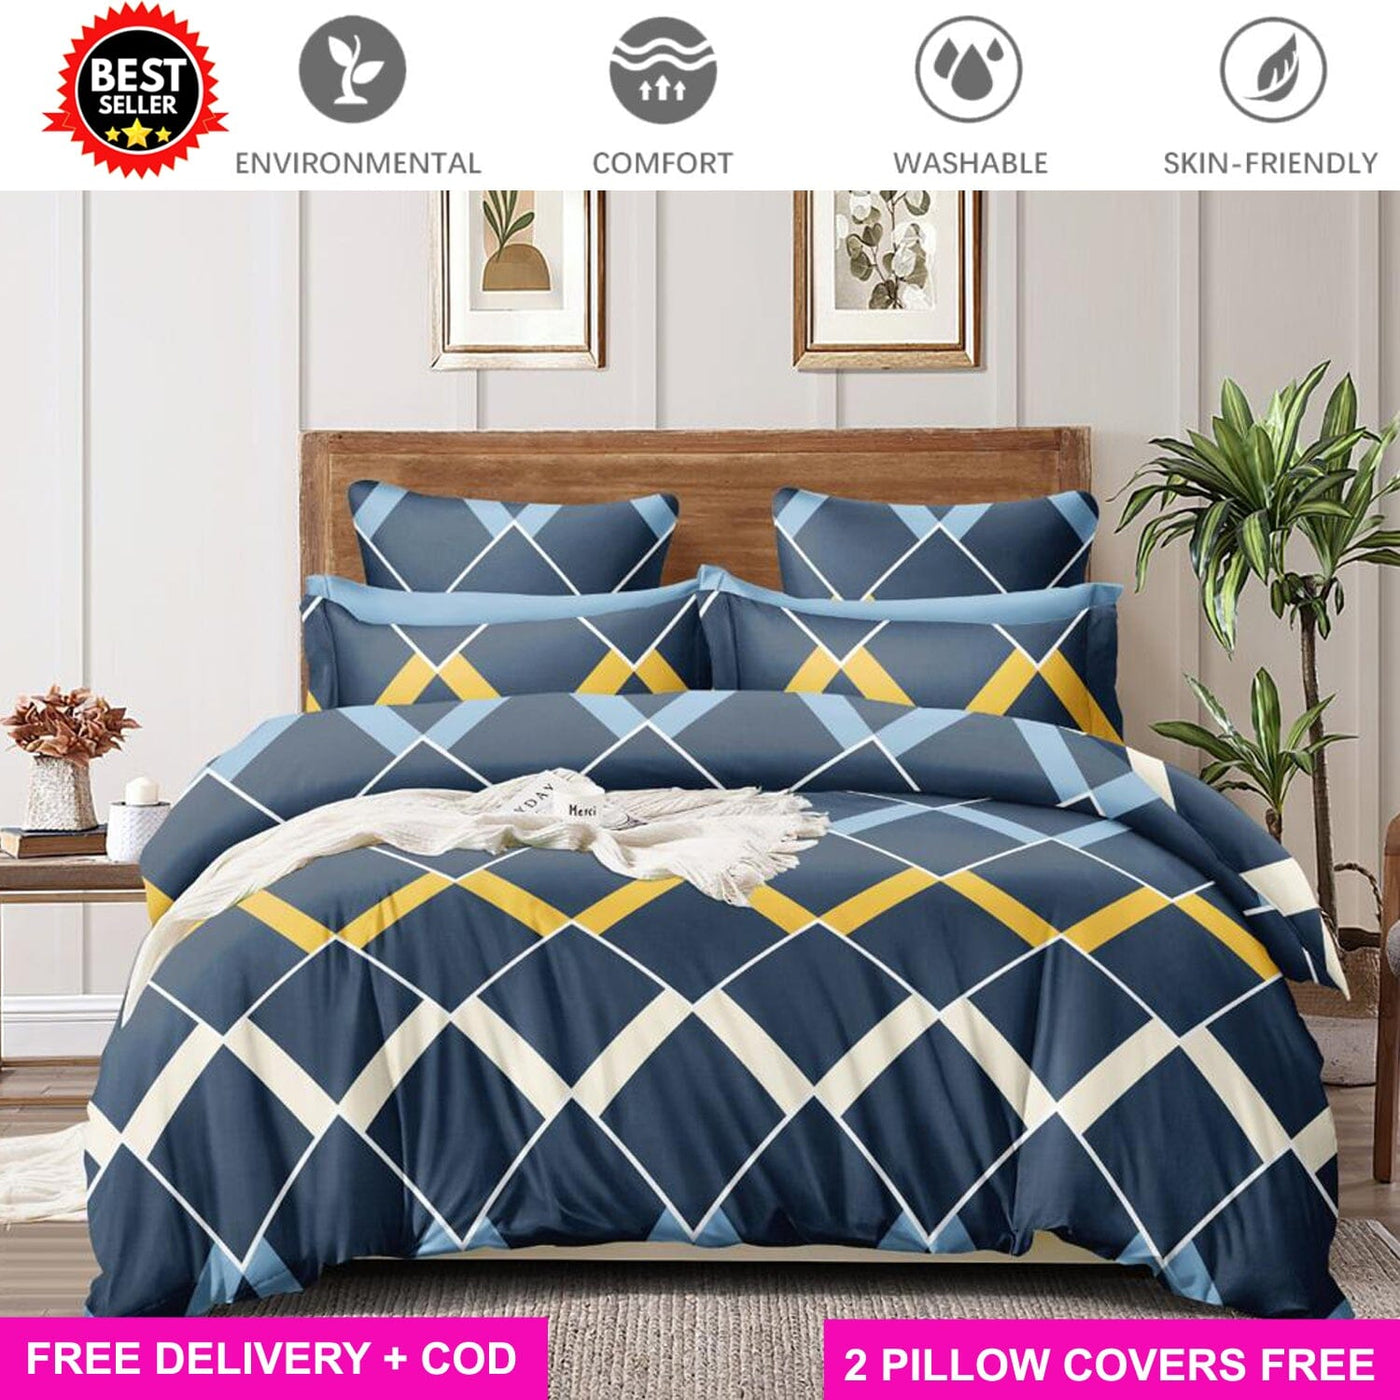 Blue Maze Full Elastic Fitted Bedsheet with 2 Pillow Covers - King Size Bed Sheets Great Happy IN 